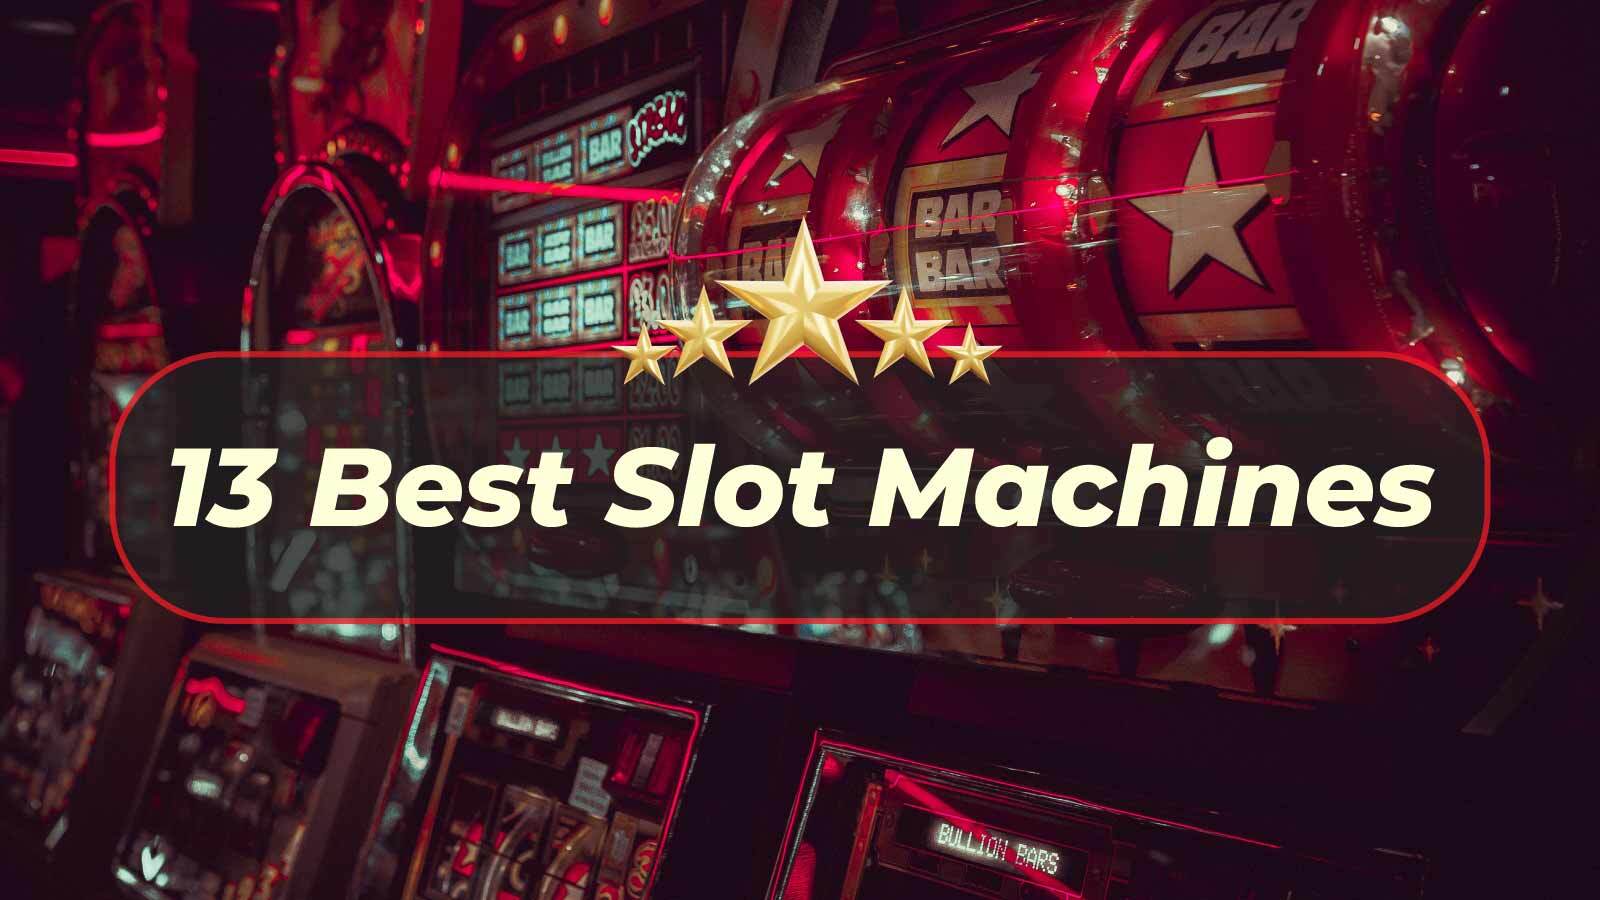 13 Best Slot Machines With Buy In Features